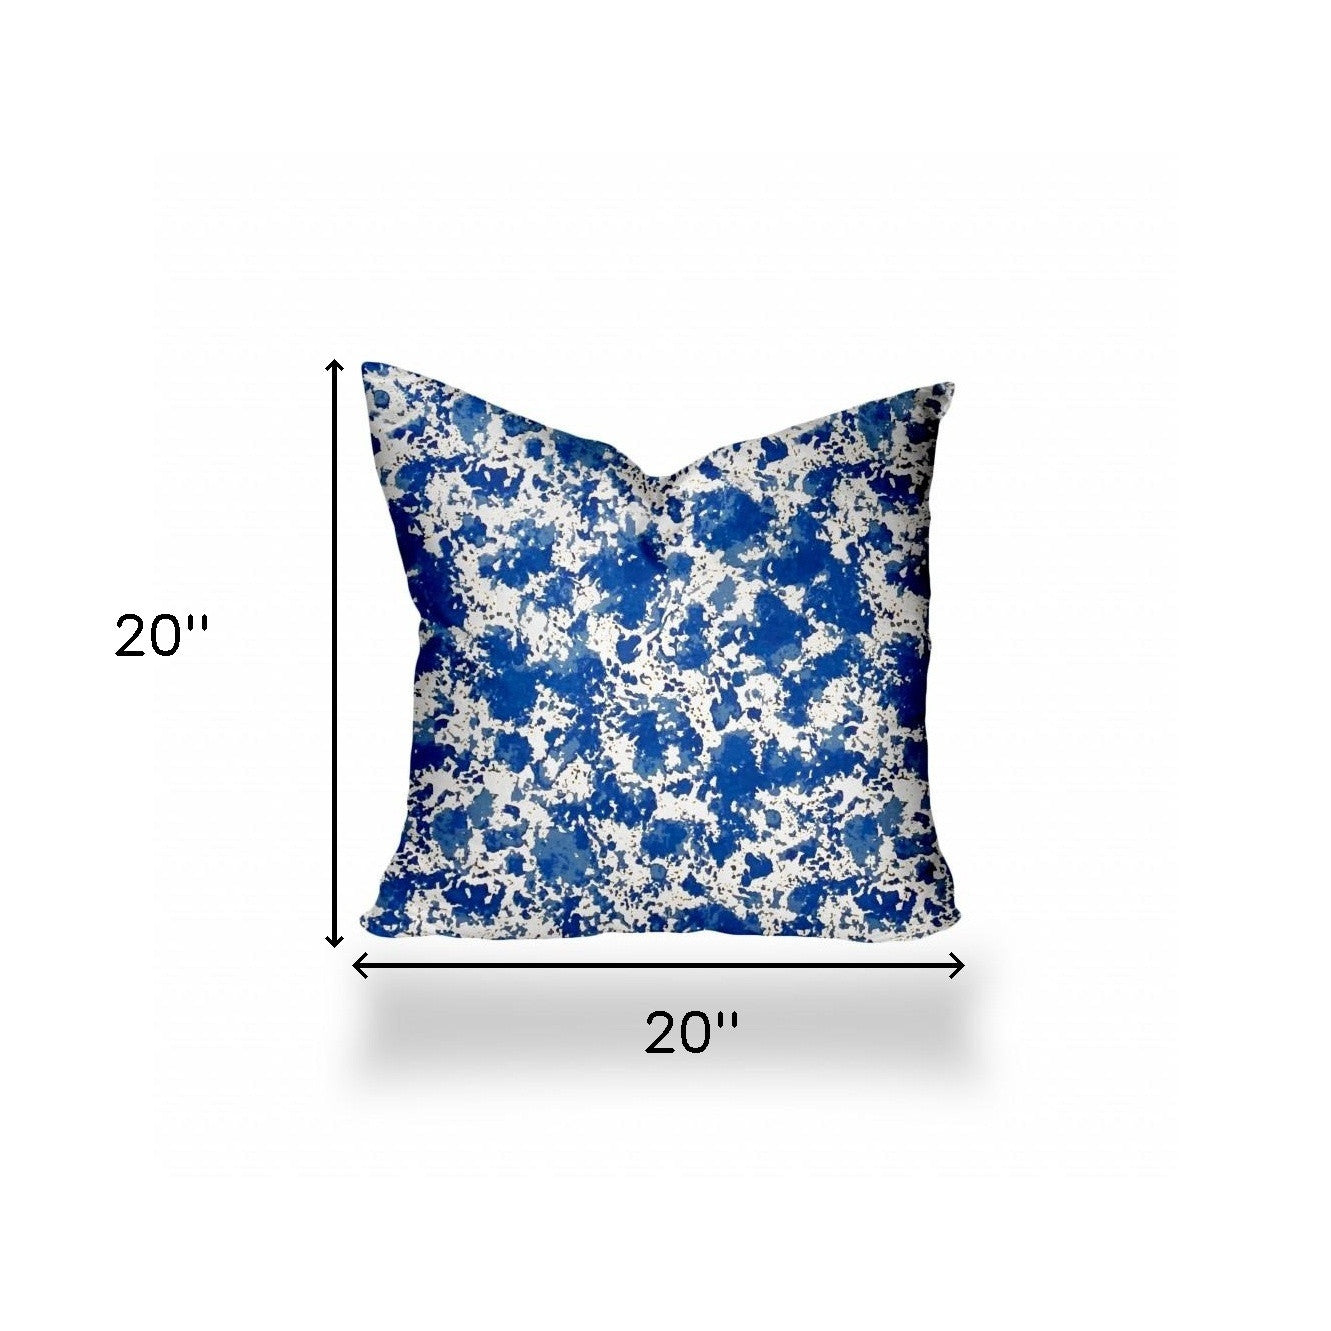 20" X 20" Blue And White Zippered Coastal Throw Indoor Outdoor Pillow Cover